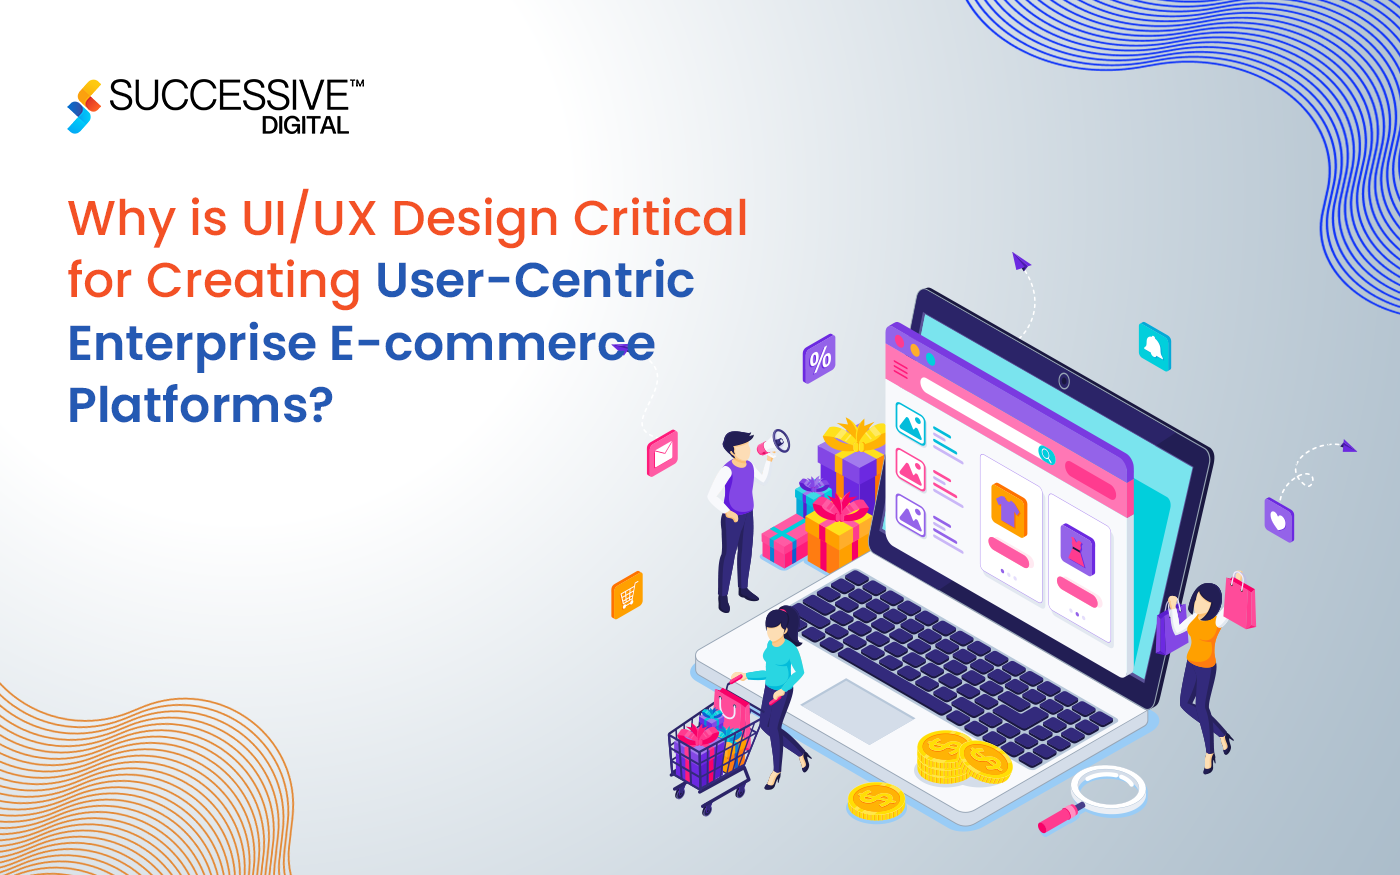 Why is UI/UX Design Critical for Creating User-Centric Enterprise E-commerce Platforms?